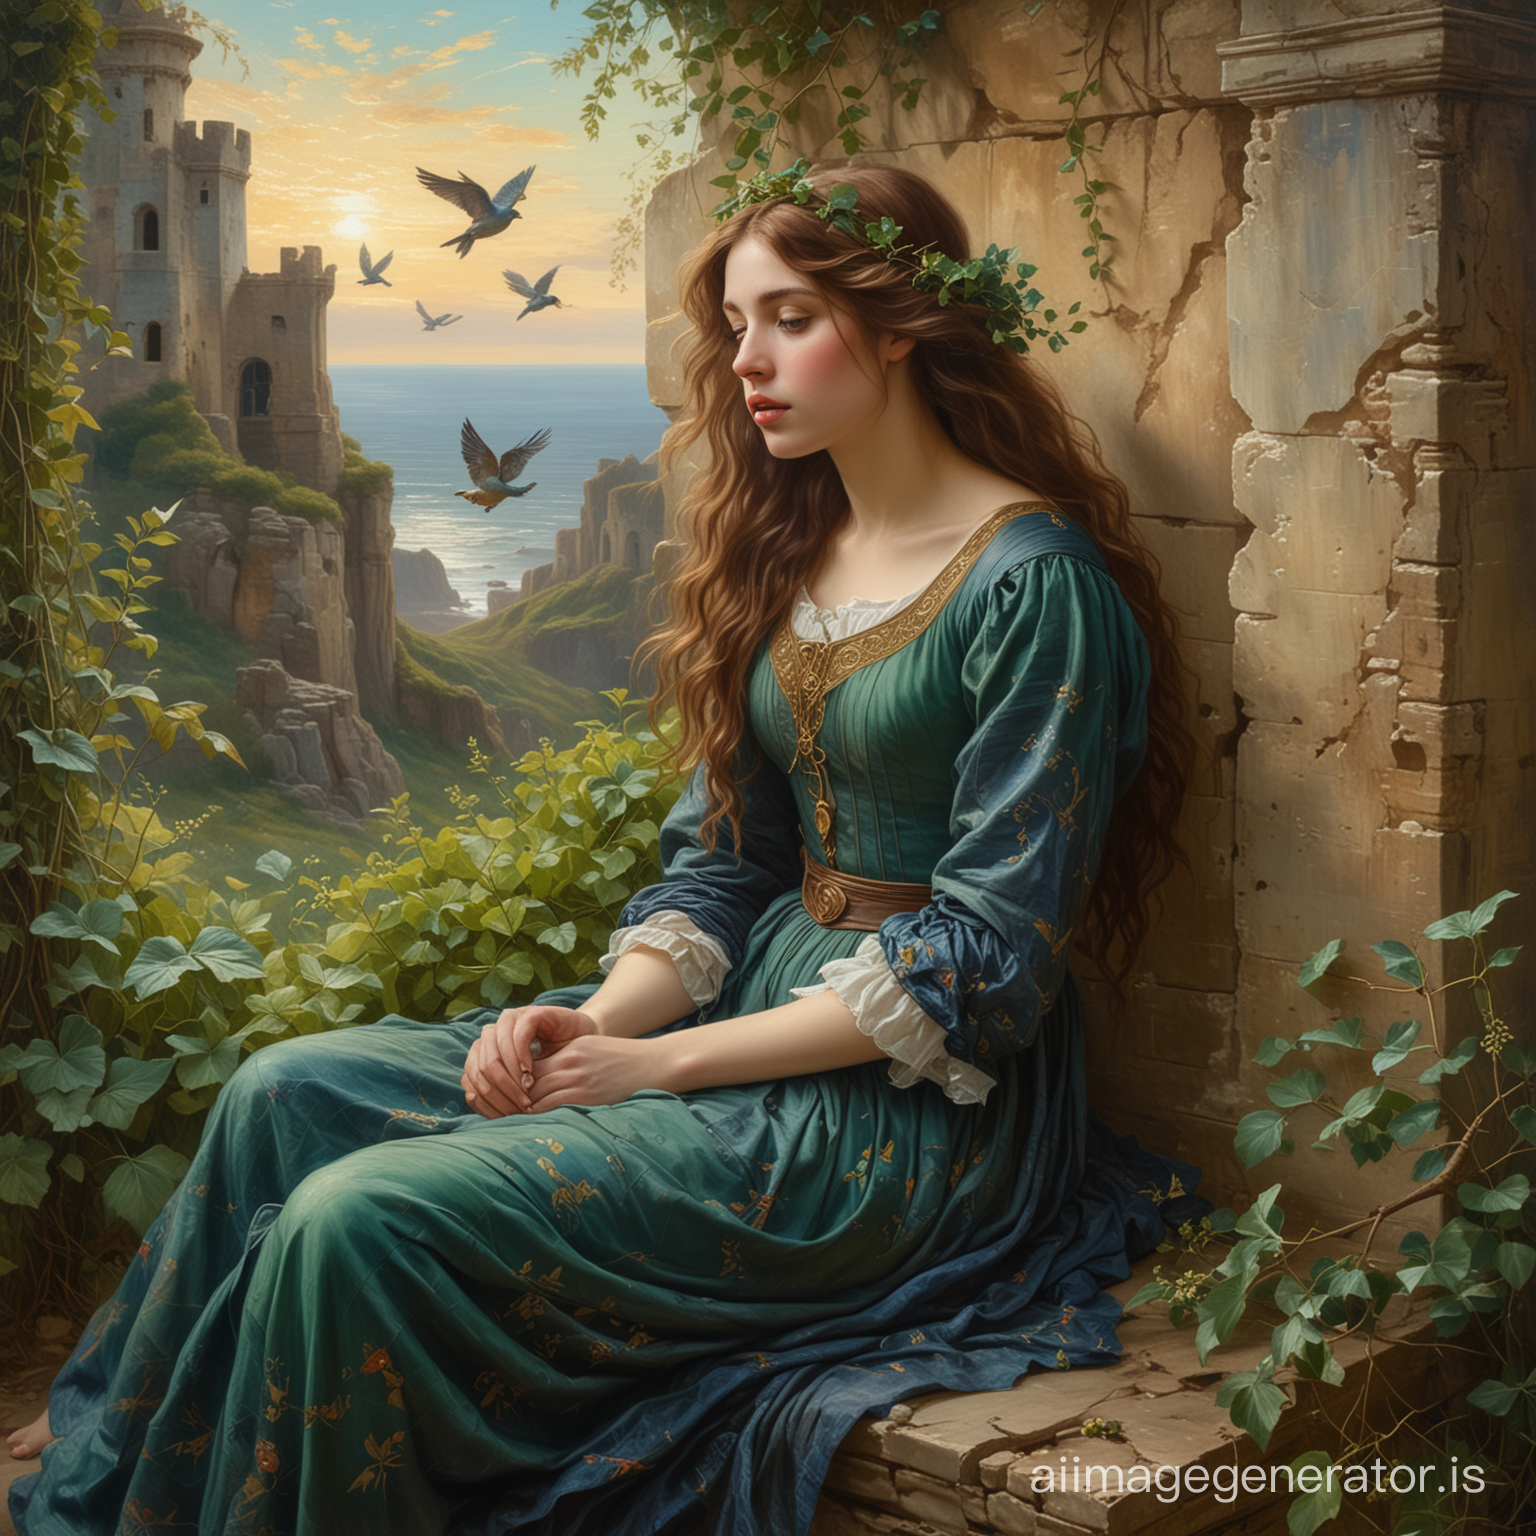 Pre-Raphaelite painting, full-length woman 20 years old, sitting on a stone in the ruins of an old castle overgrown with hedera, diagonal angle, wind ruffles dark wavy hair, dark green loose dress made of heavy fabric with a blue pattern without a belt, soft, warm sunlight illuminates green hedera, makes a woman's hair bright, large facial features, thick lips, a bird flies in the sky, oil on canvas, brush strokes, texture, golden ratio, style of the artist Waterhouse